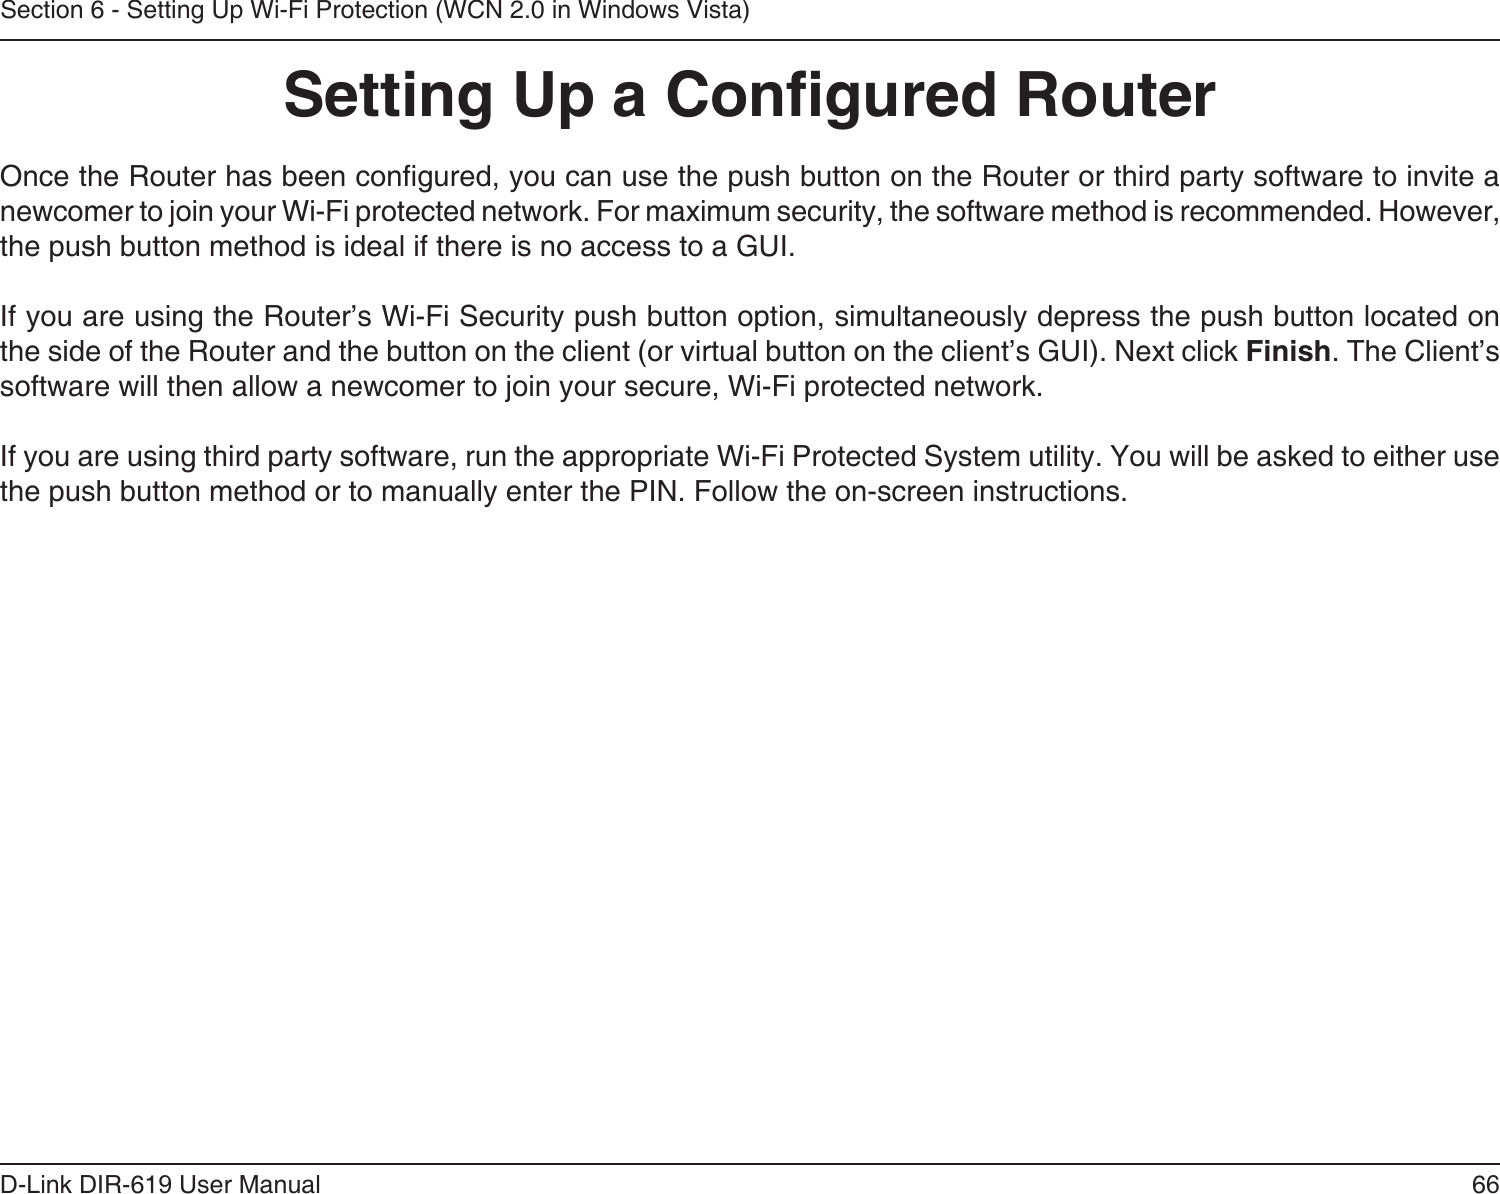 66D-Link DIR-619 User ManualSection 6 - Setting Up Wi-Fi Protection (WCN 2.0 in Windows Vista)Setting Up a Congured RouterOnce the Router has been congured, you can use the push button on the Router or third party software to invite a newcomer to join your Wi-Fi protected network. For maximum security, the software method is recommended. However, the push button method is ideal if there is no access to a GUI.If you are using the Router’s Wi-Fi Security push button option, simultaneously depress the push button located on the side of the Router and the button on the client (or virtual button on the client’s GUI). Next click Finish. The Client’ssoftware will then allow a newcomer to join your secure, Wi-Fi protected network.If you are using third party software, run the appropriate Wi-Fi Protected System utility. You will be asked to either use the push button method or to manually enter the PIN. Follow the on-screen instructions.        